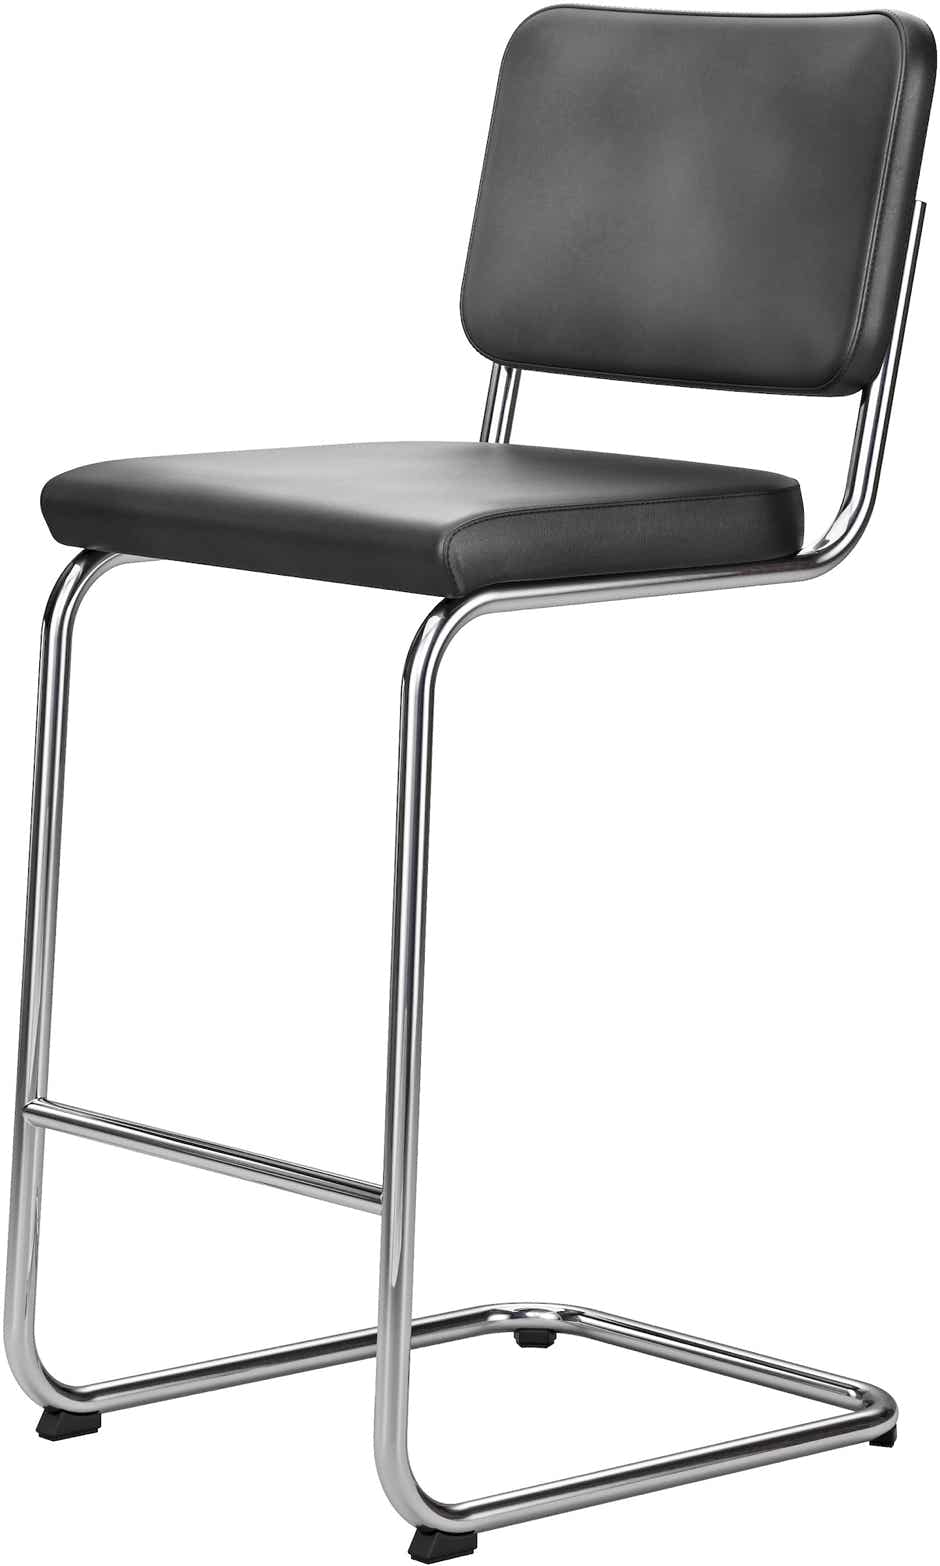 S32 PVH Barstools (upholstered seat and back)